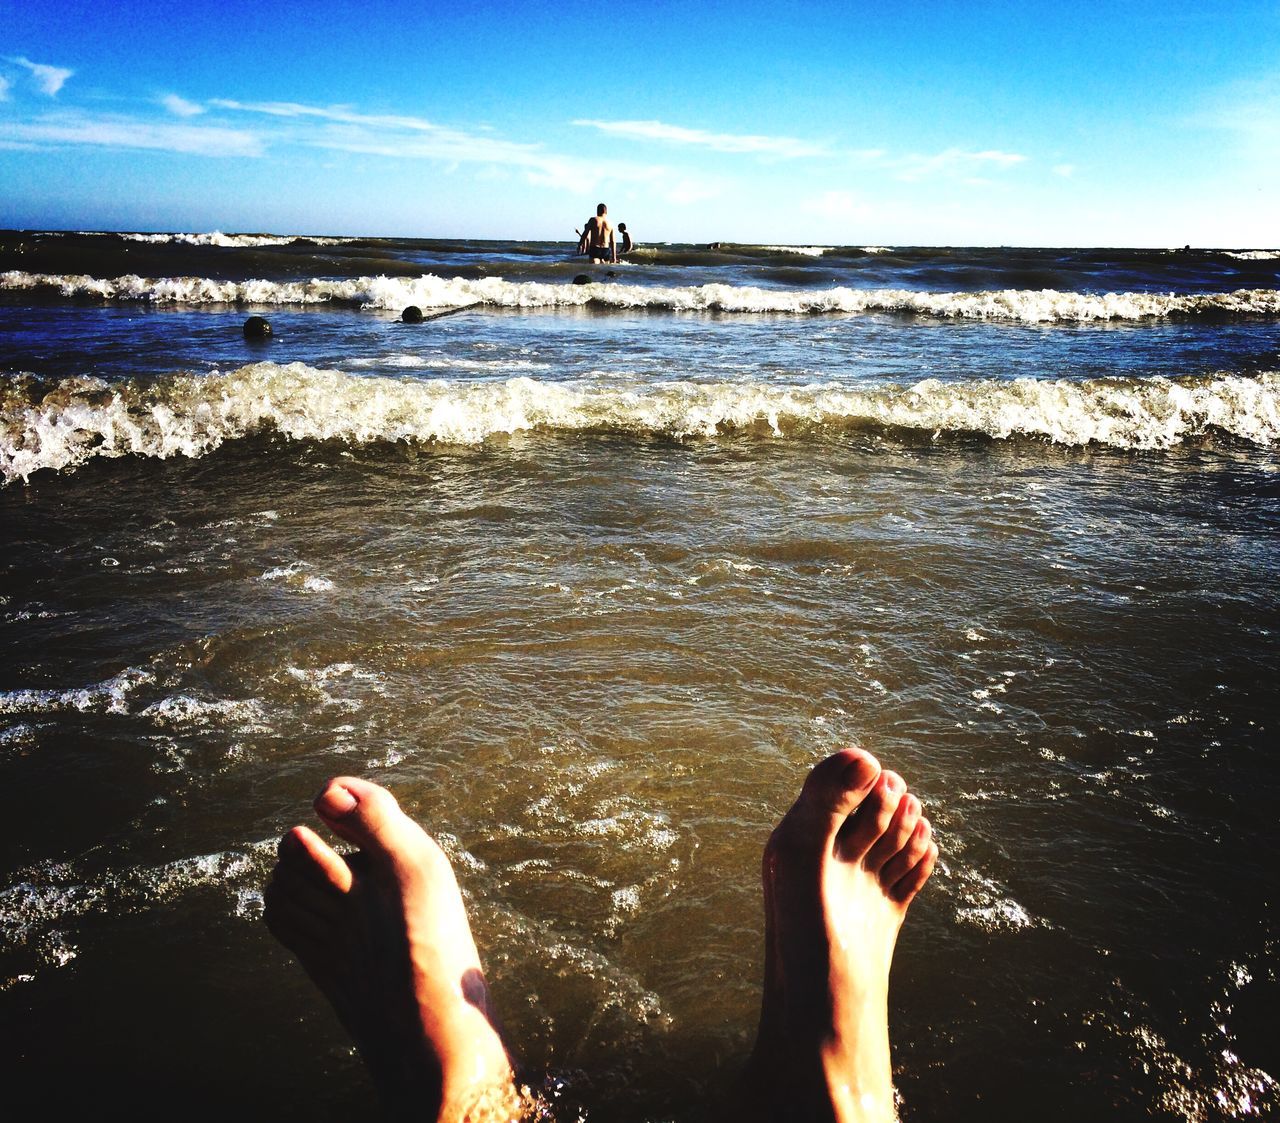 water, low section, person, sea, lifestyles, leisure activity, barefoot, beach, personal perspective, human foot, vacations, shore, standing, relaxation, scenics, sky